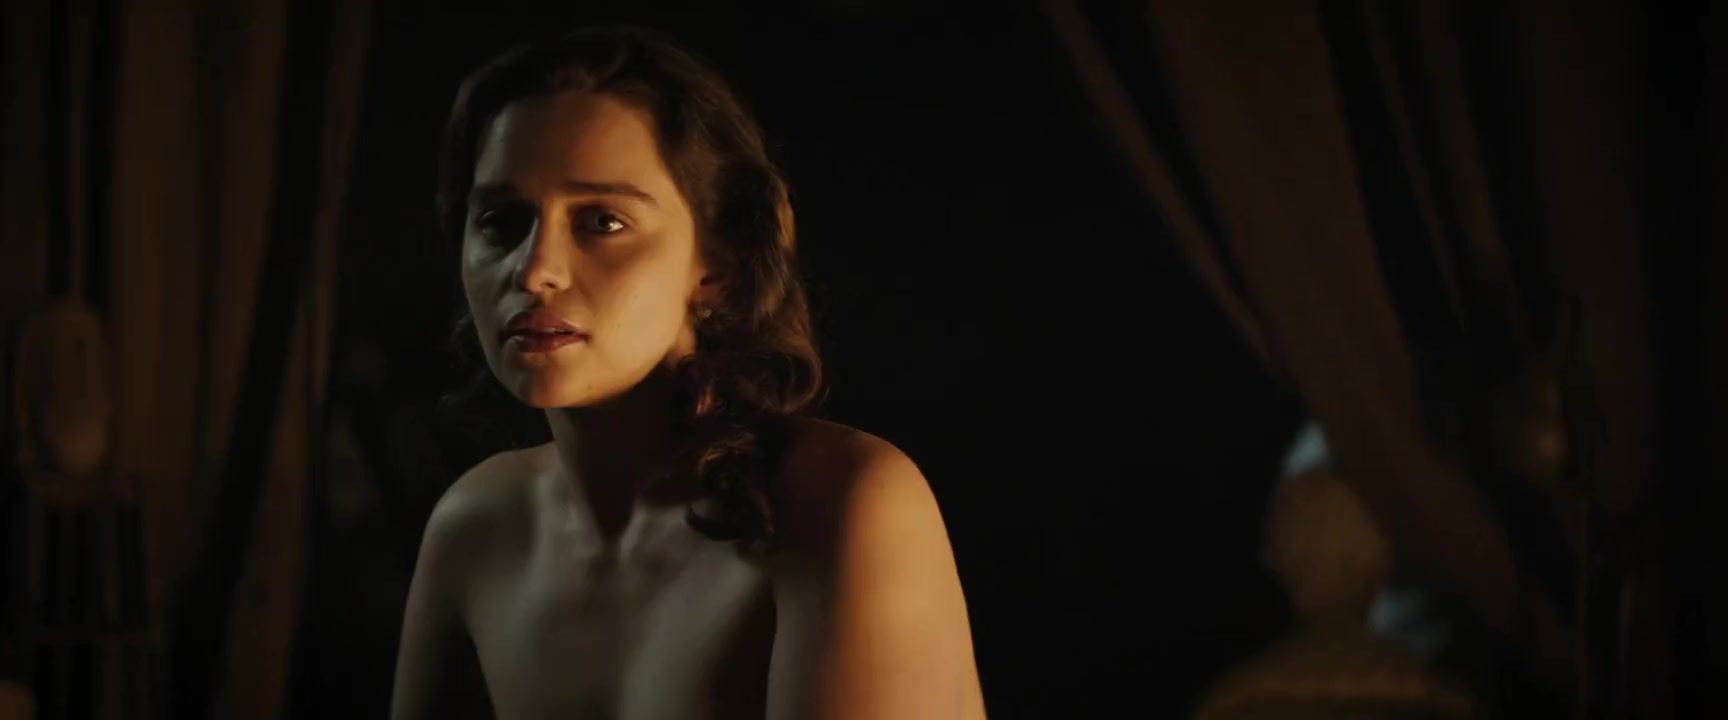 Hardcore Sexy video Emilia Clarke Fucked & Posing Nude in Voice from the Stone (2017) GamCore - 1